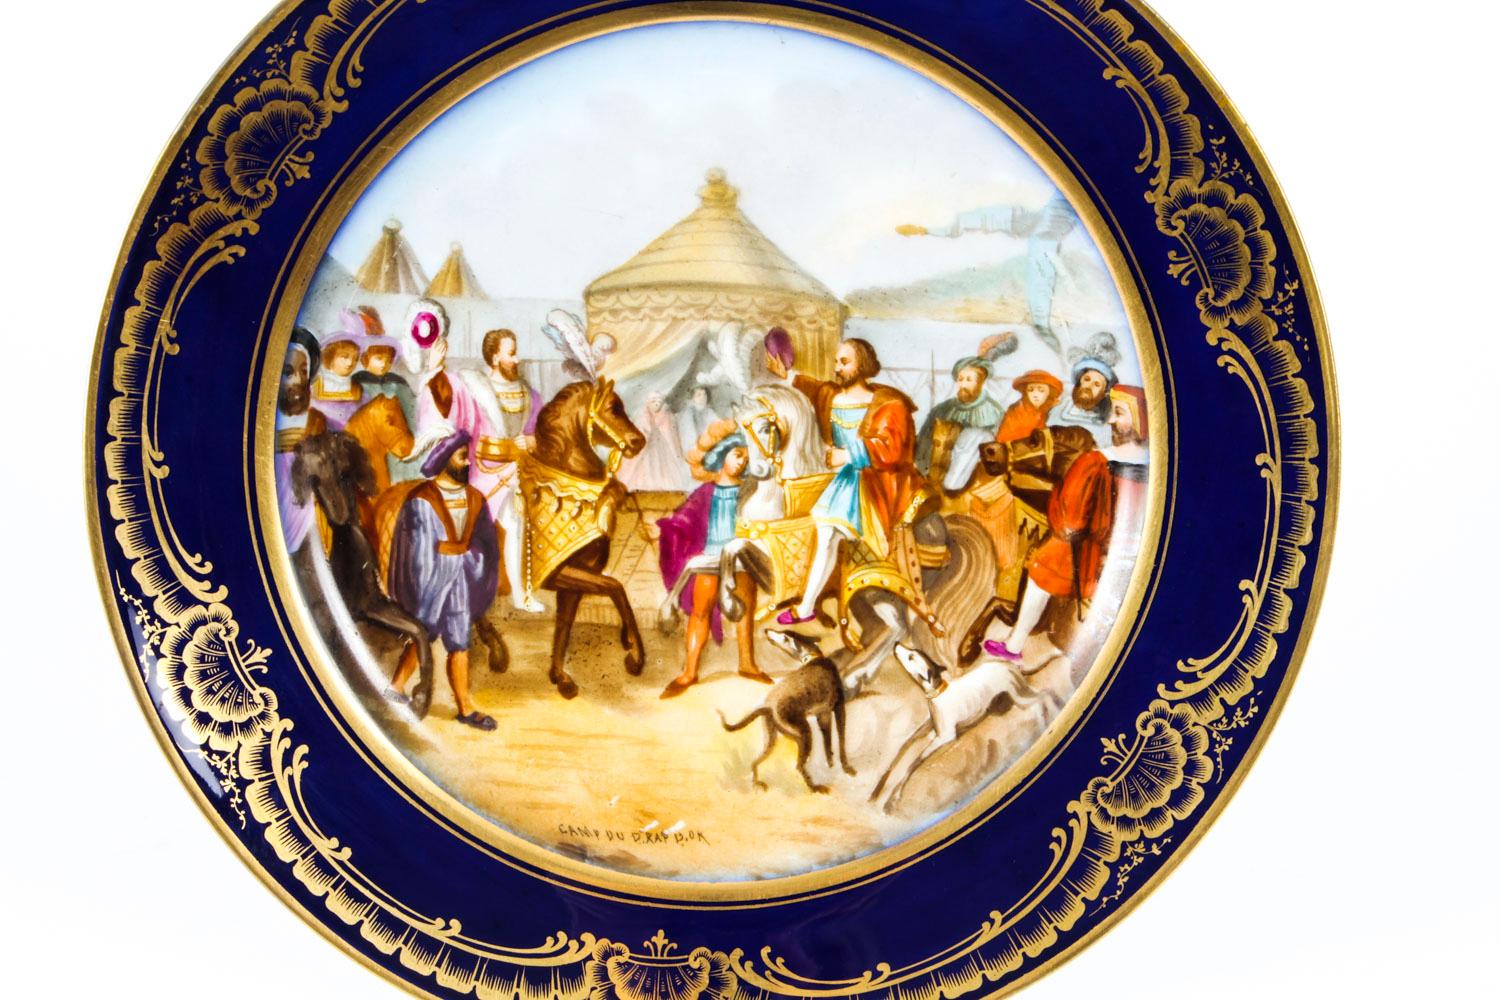 This is a beautiful antique French Sevres porcelain cabinet plate, Circa 1880 in date.
 
It is superbly hand painted plate and features a central panel with a 15th century battle scene within Royal blue borders with decorative gilt scrolls and